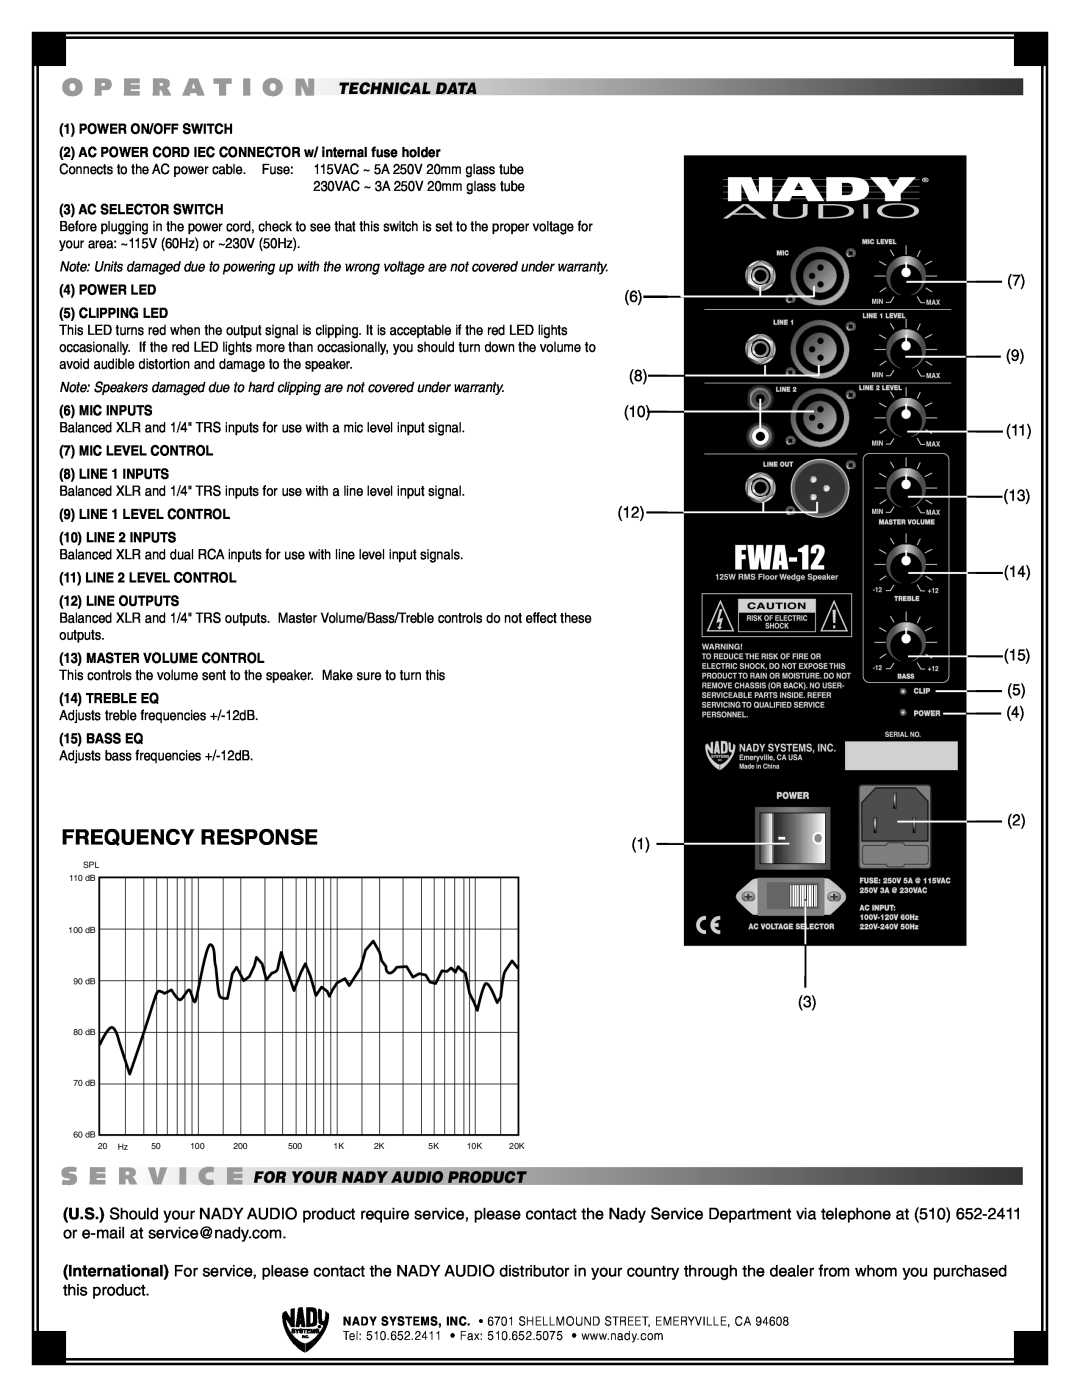 Nady Systems FWA12 instruction sheet O P E R A T I On, S E Rvice, Frequency Response, For Your Nady Audio Product 